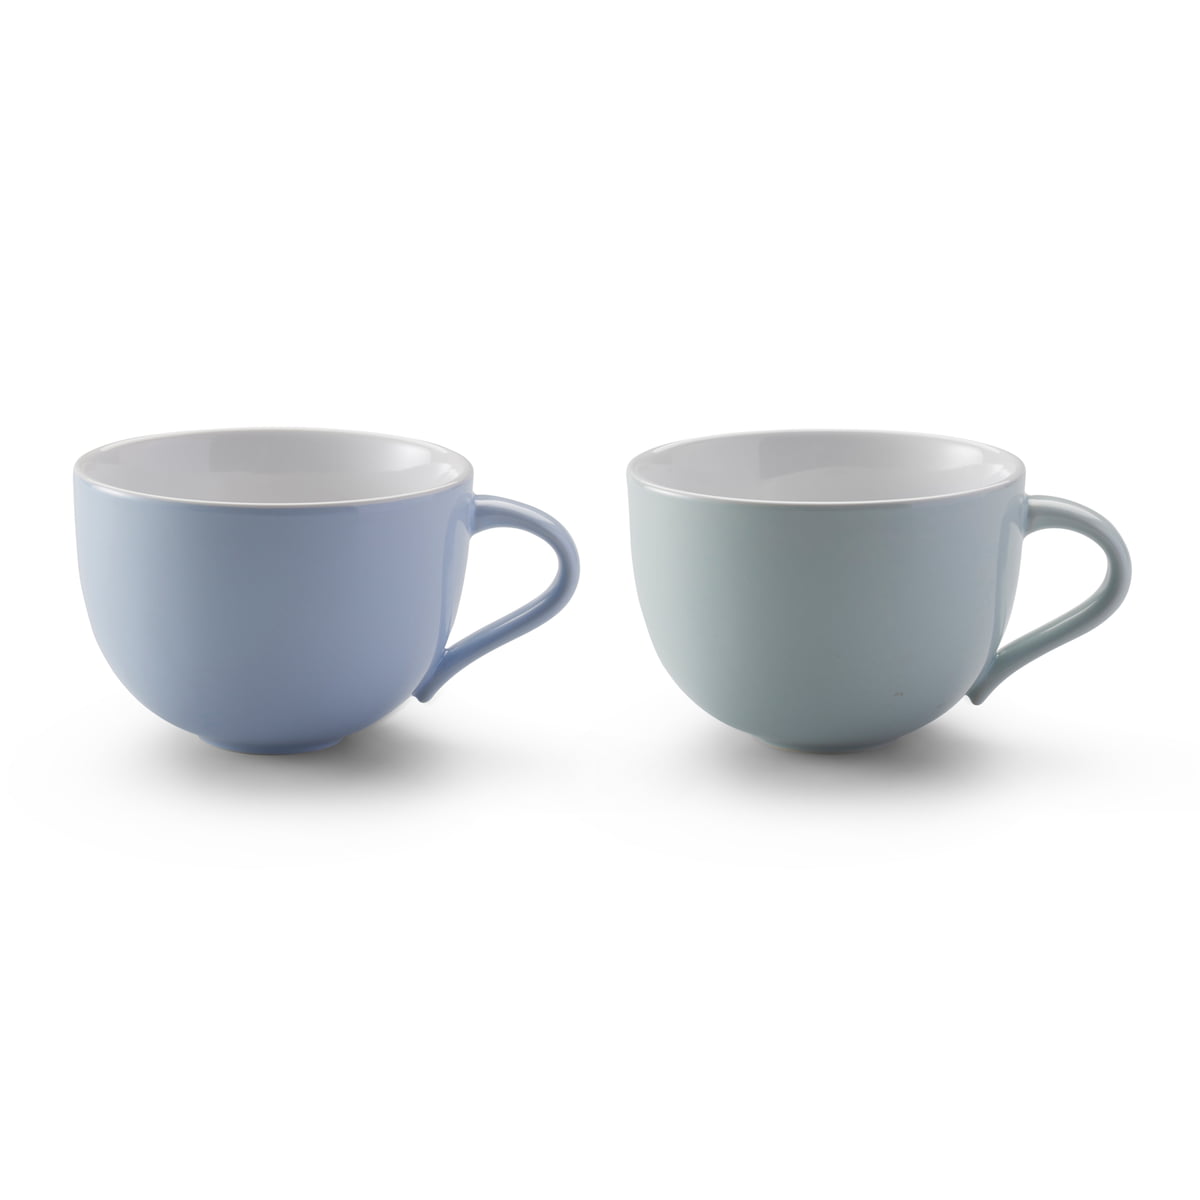 Cups by Stelton the home shop